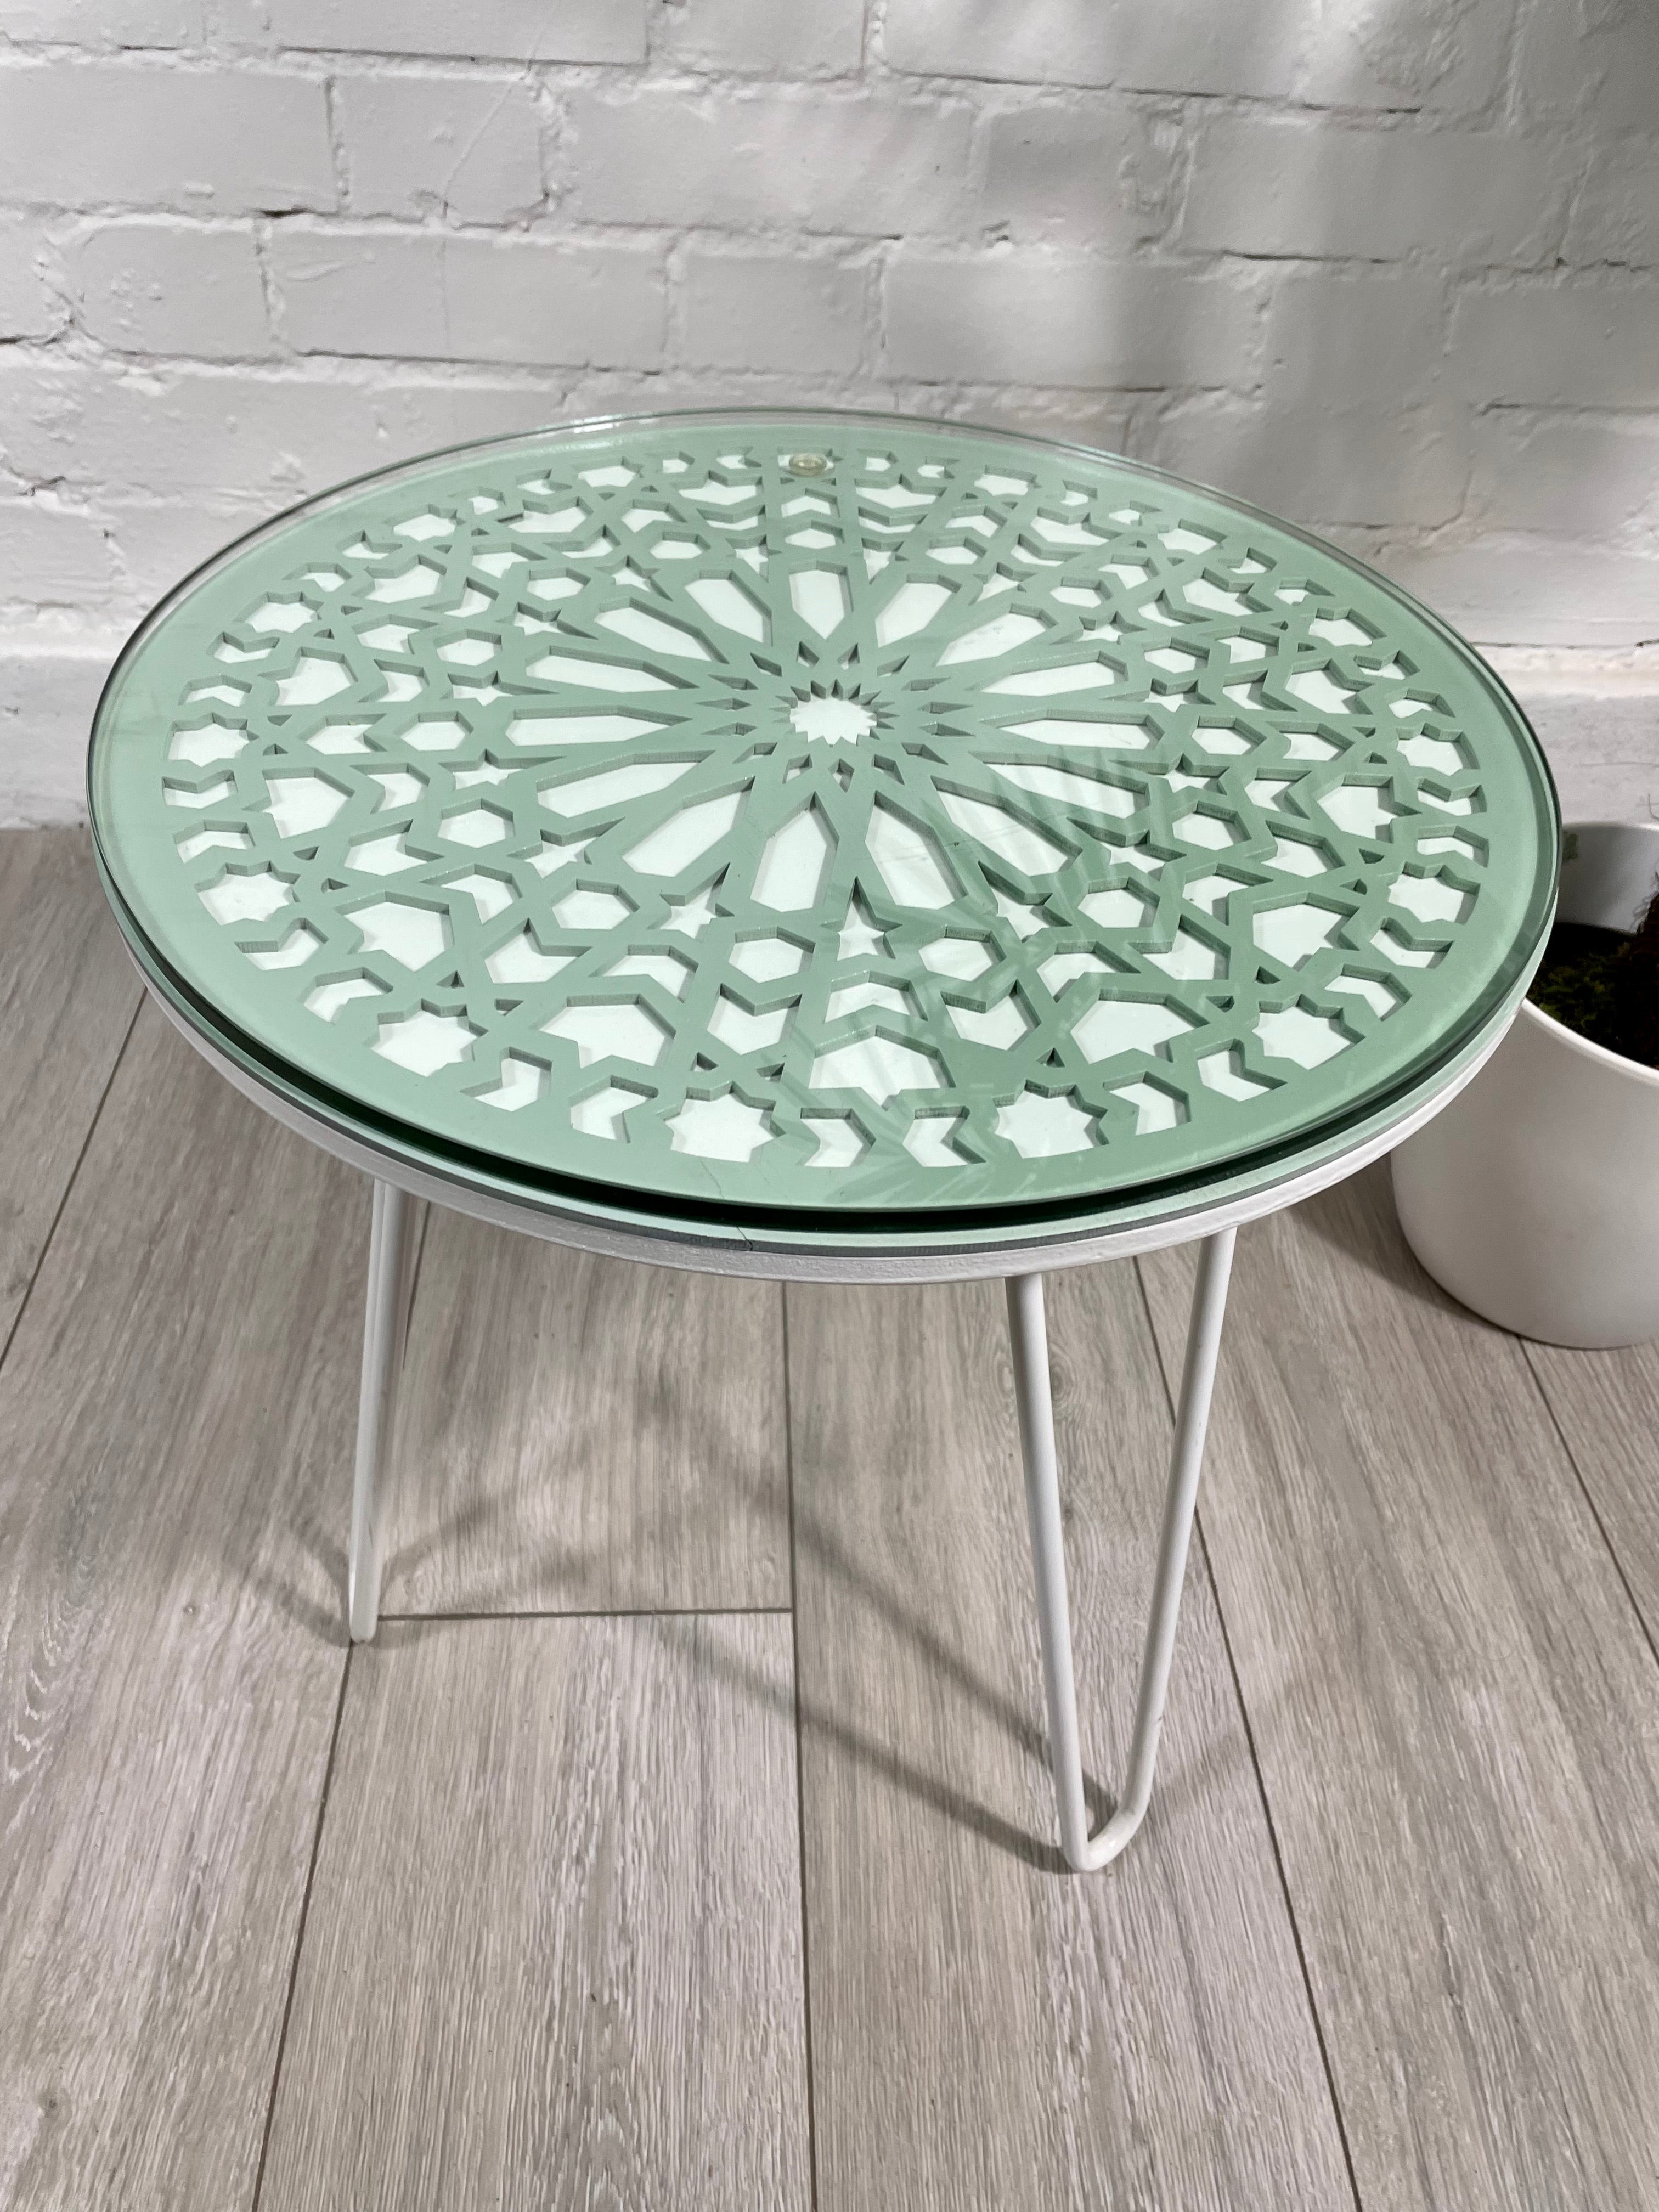 Moroccan Mosaic Side Table Pin Legs, Zellige Table Green Pastel and White with Glass Top